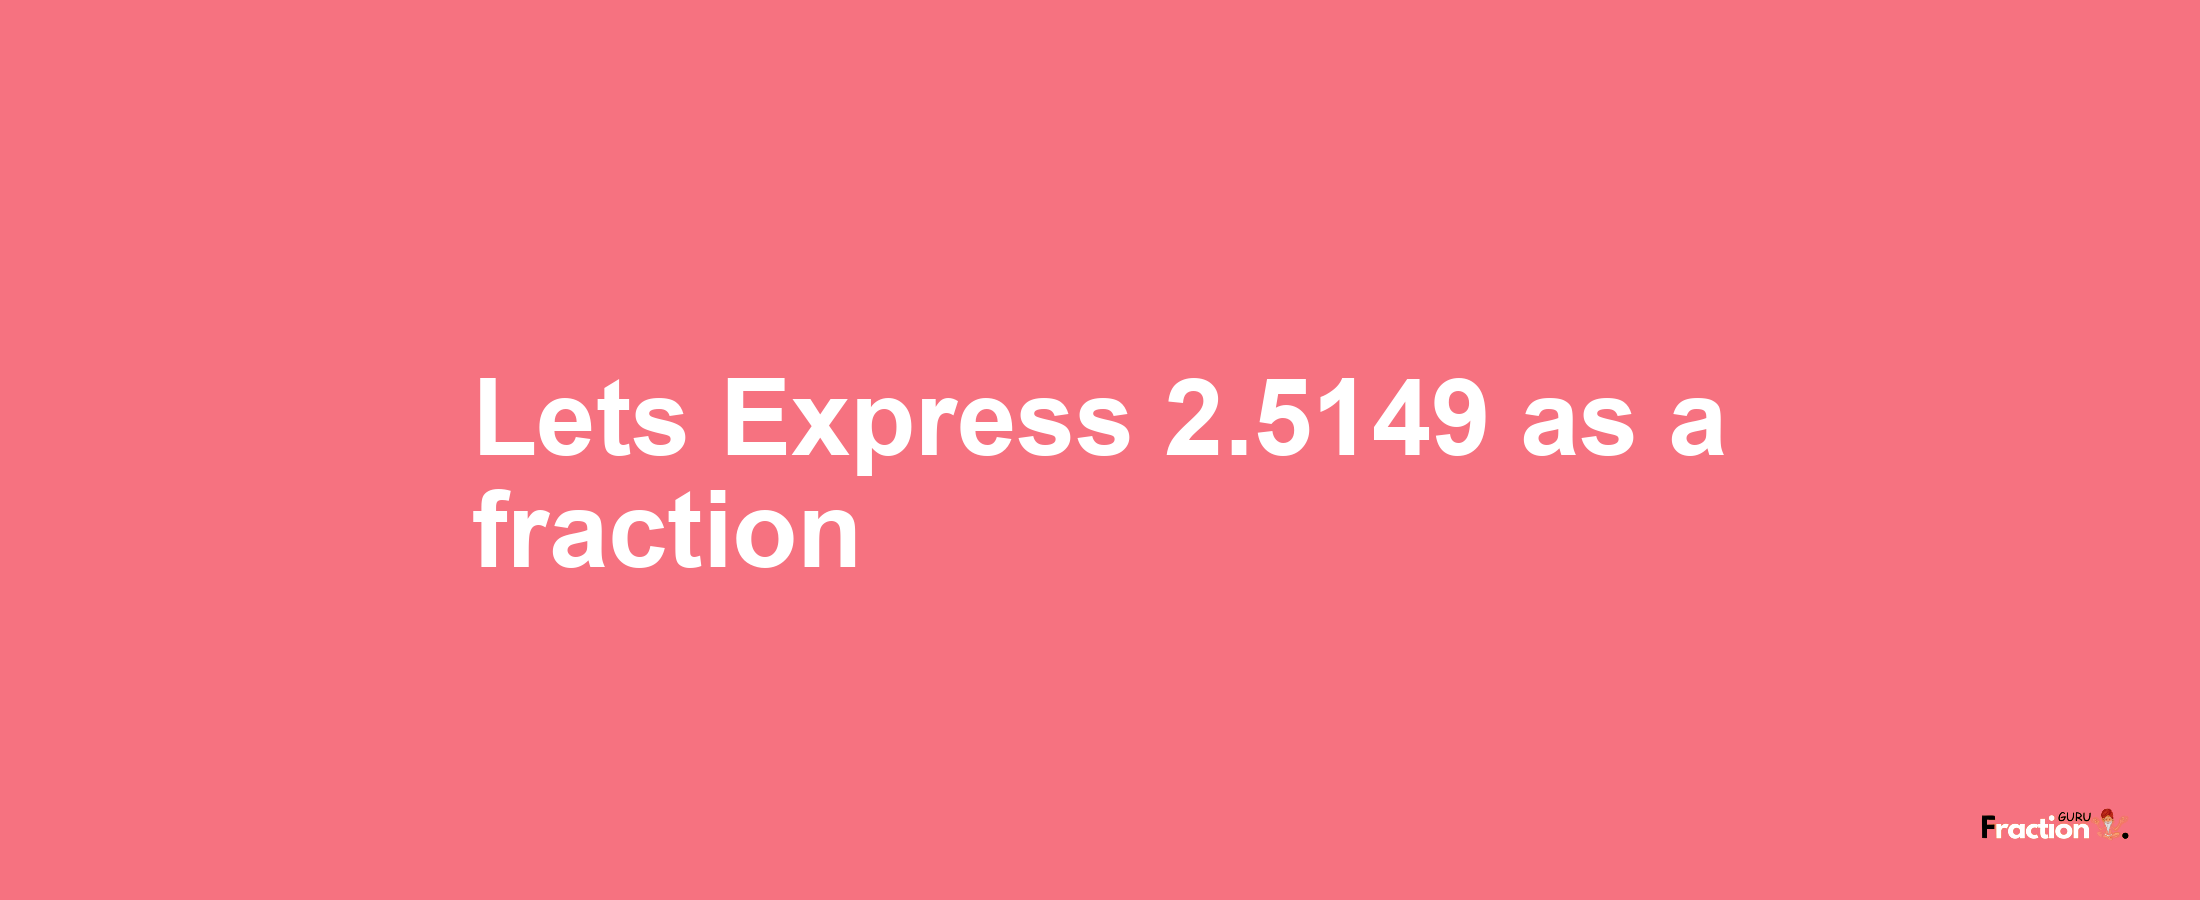 Lets Express 2.5149 as afraction